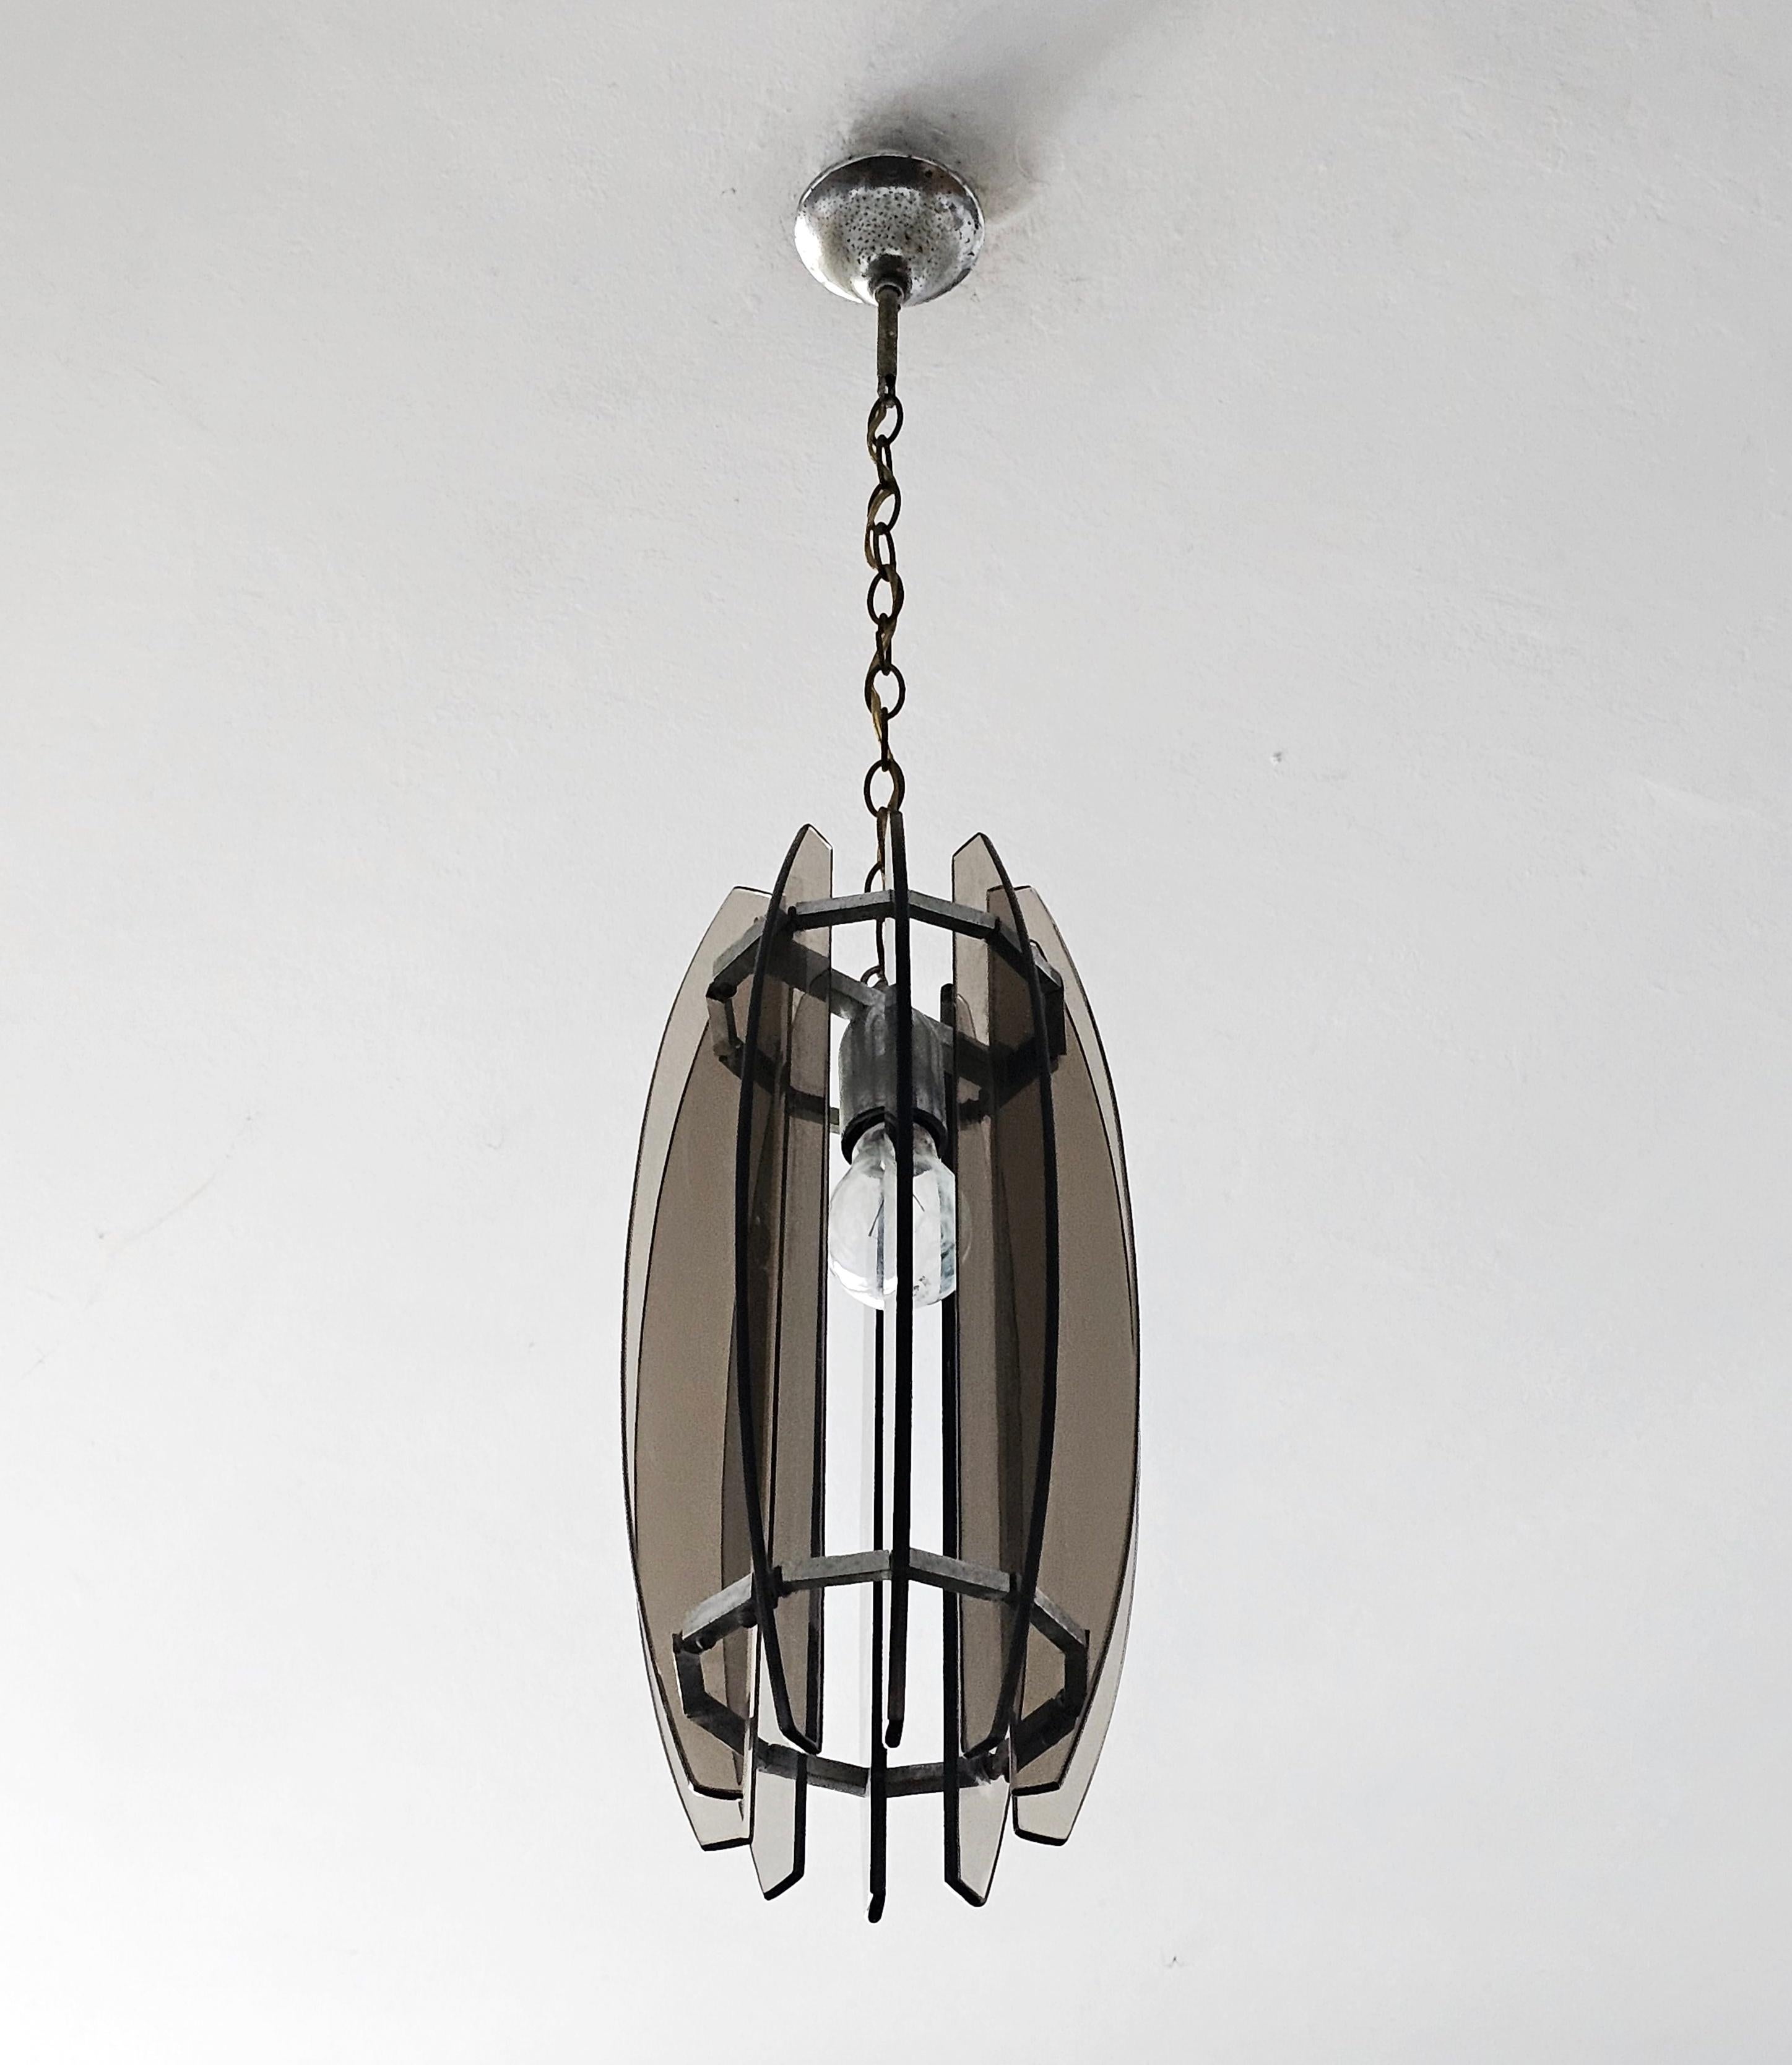 Glass Pendant Light in Chrome and Smoked Glass in Fontana Arte style, Italy 1970 For Sale 1